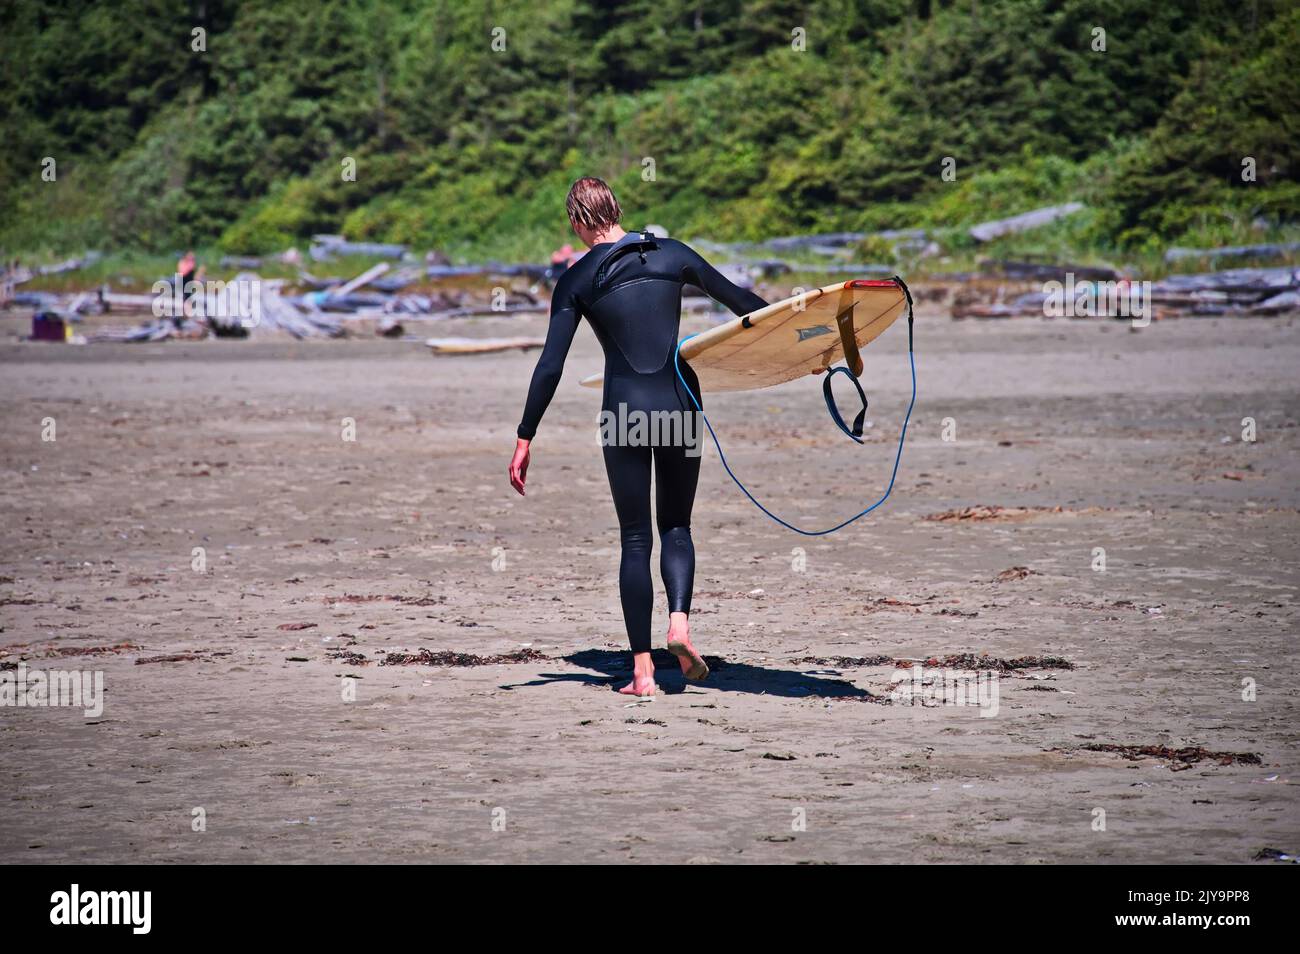 Surfer walking on the beach in Tofino, Canada carrying the board Stock Photo